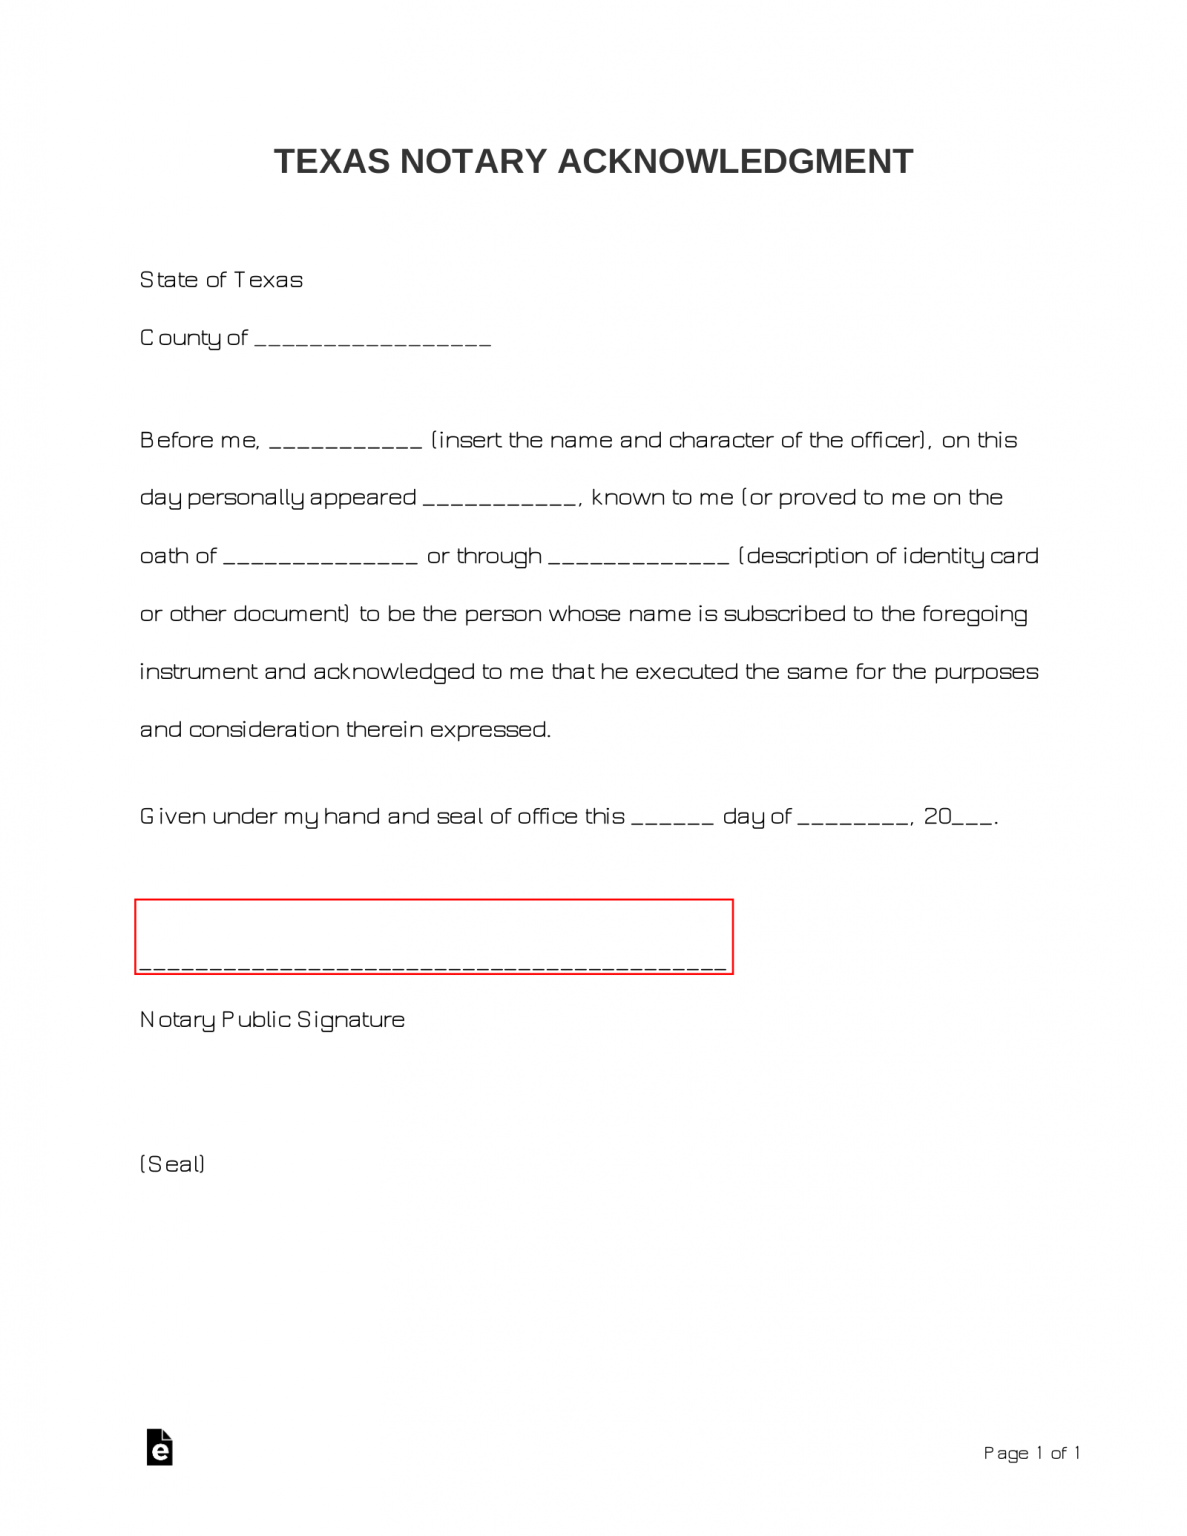 free-texas-notary-acknowledgment-form-pdf-word-eforms